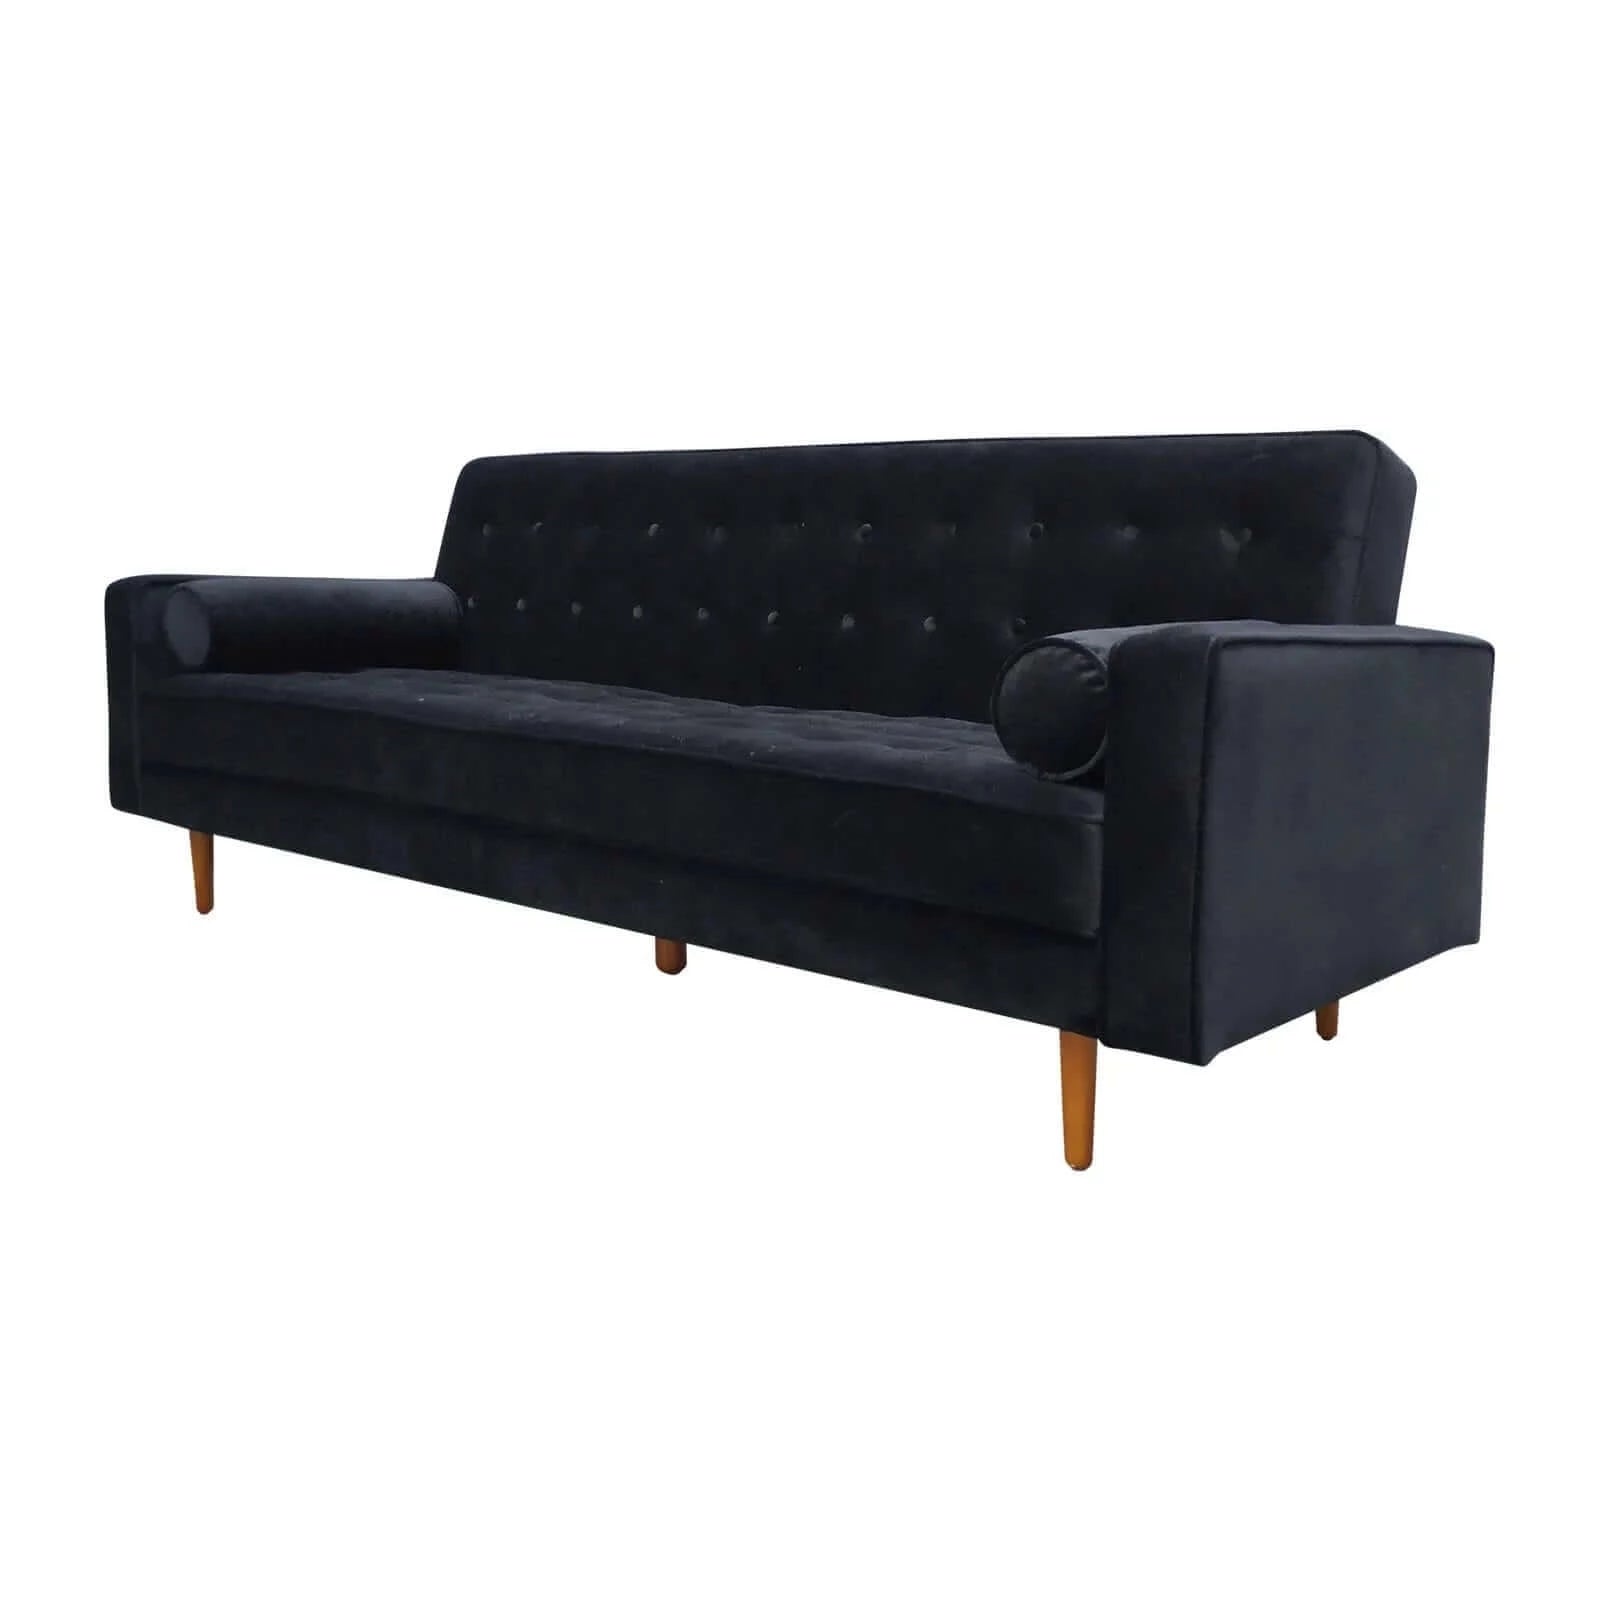 Buy sofa bed 3 seater button tufted lounge set for living room couch in velvet black colour - upinteriors-Upinteriors